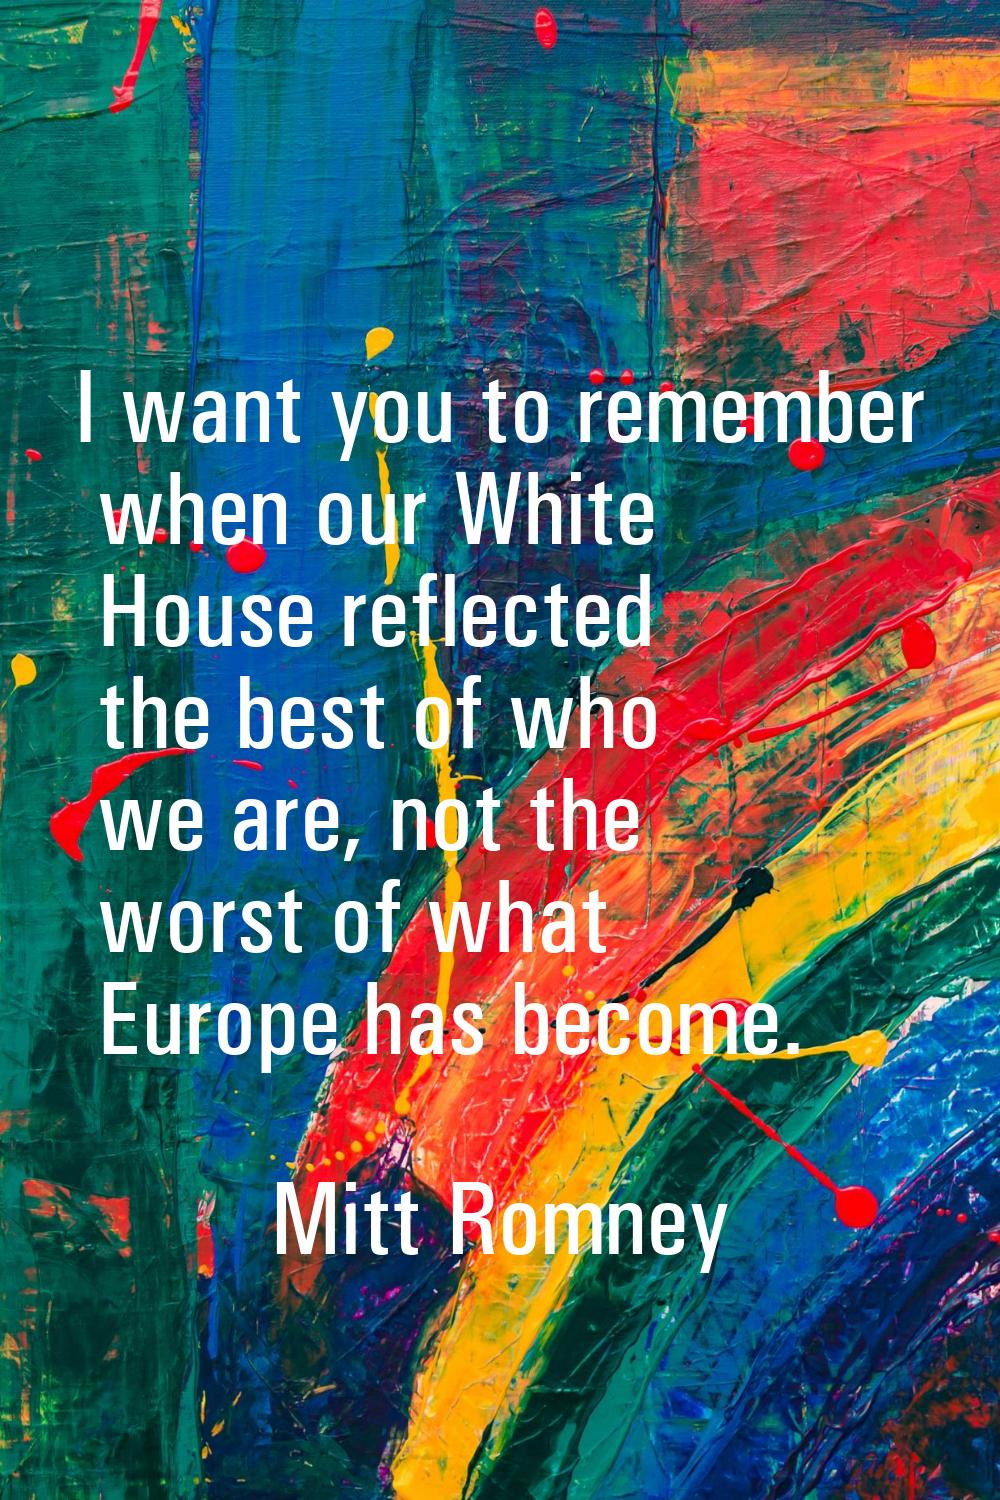 I want you to remember when our White House reflected the best of who we are, not the worst of what